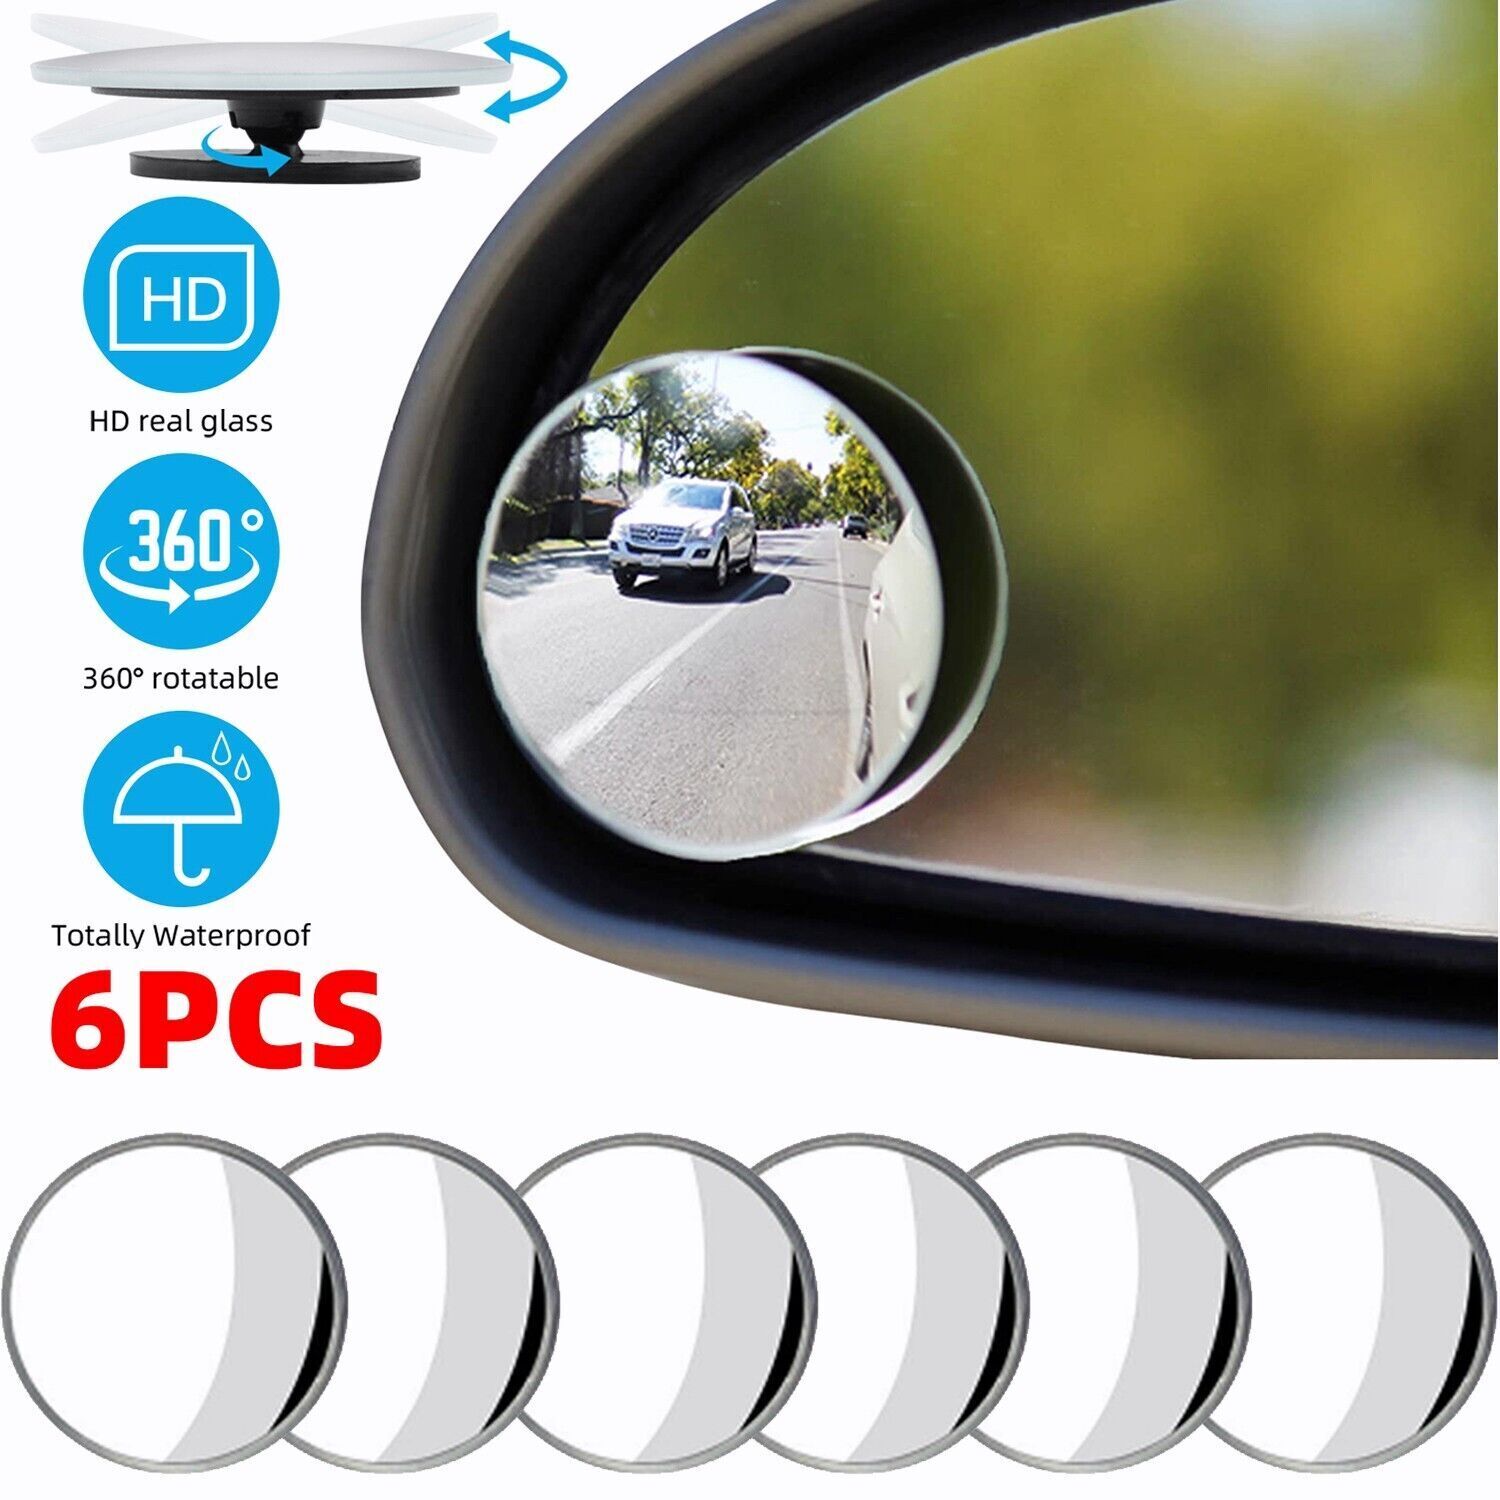 6PCS Blind Spot Mirrors Round HD Glass Convex 360° Side Rear View Mirror for Car